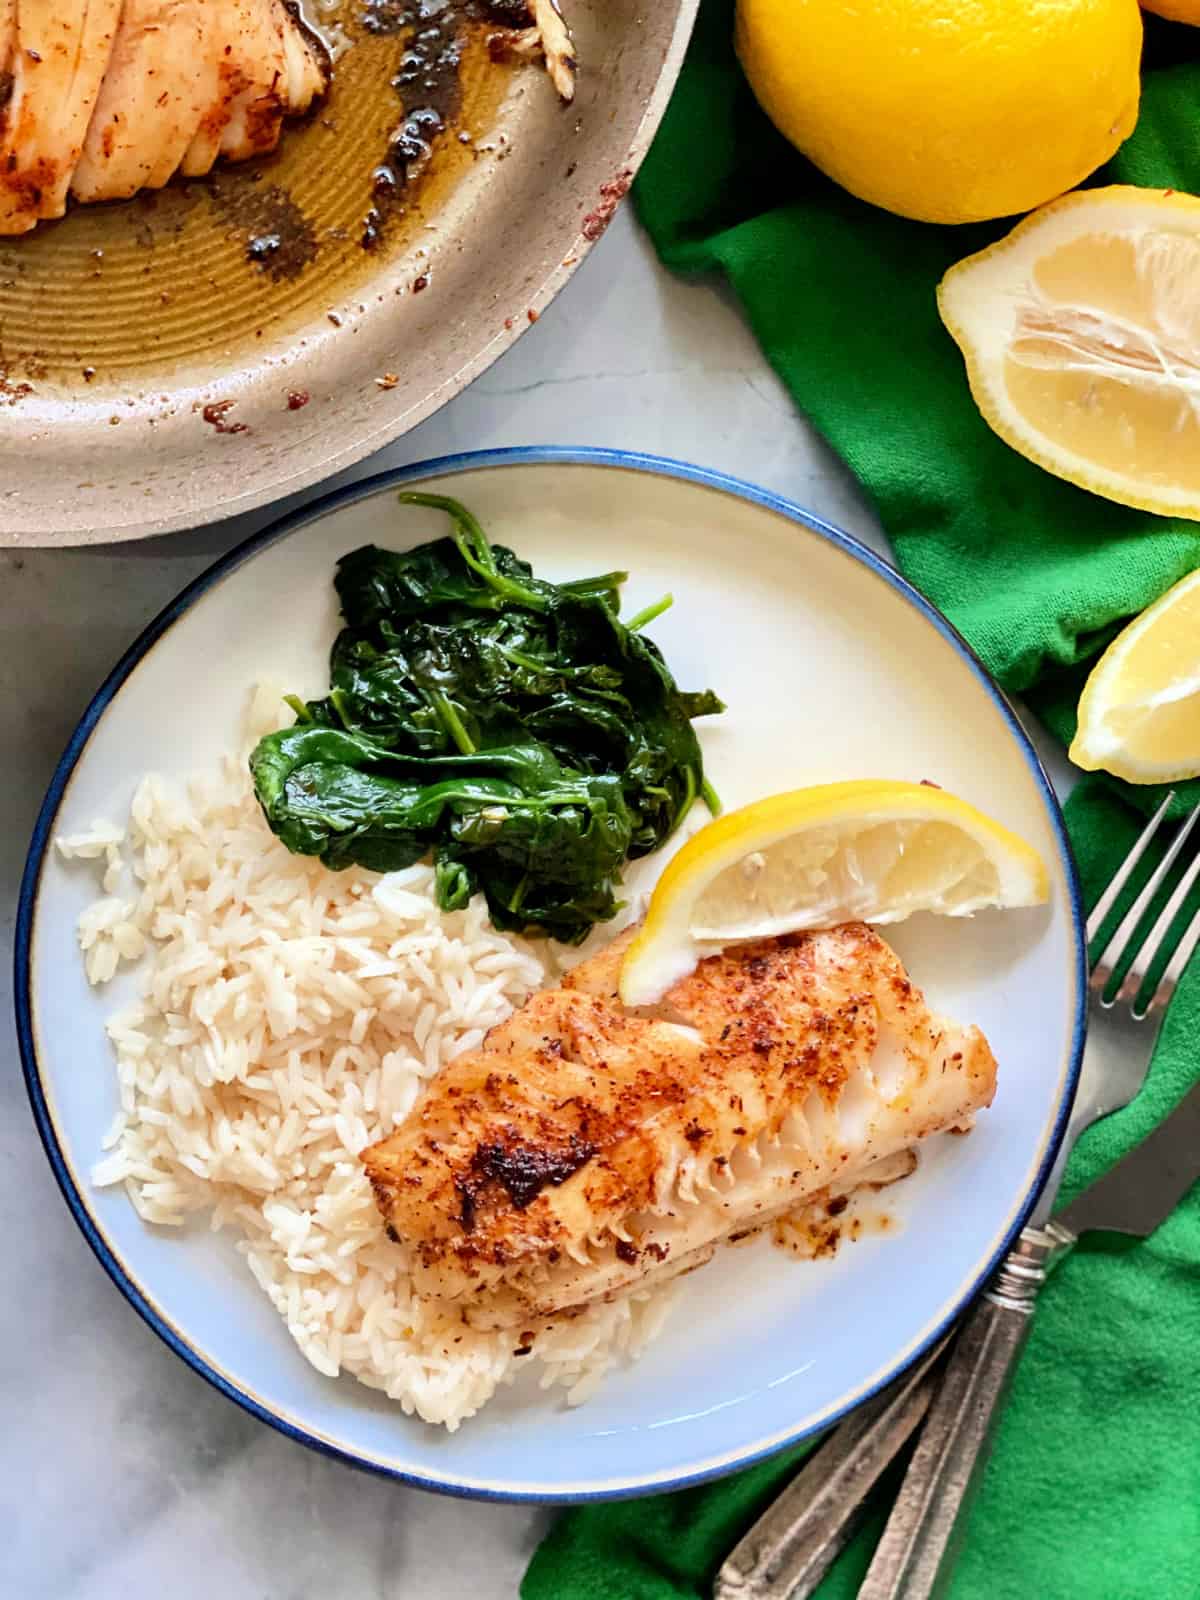 Top view shot of Blackened cod, white rice, spinach, and a lemon slice on a white plate